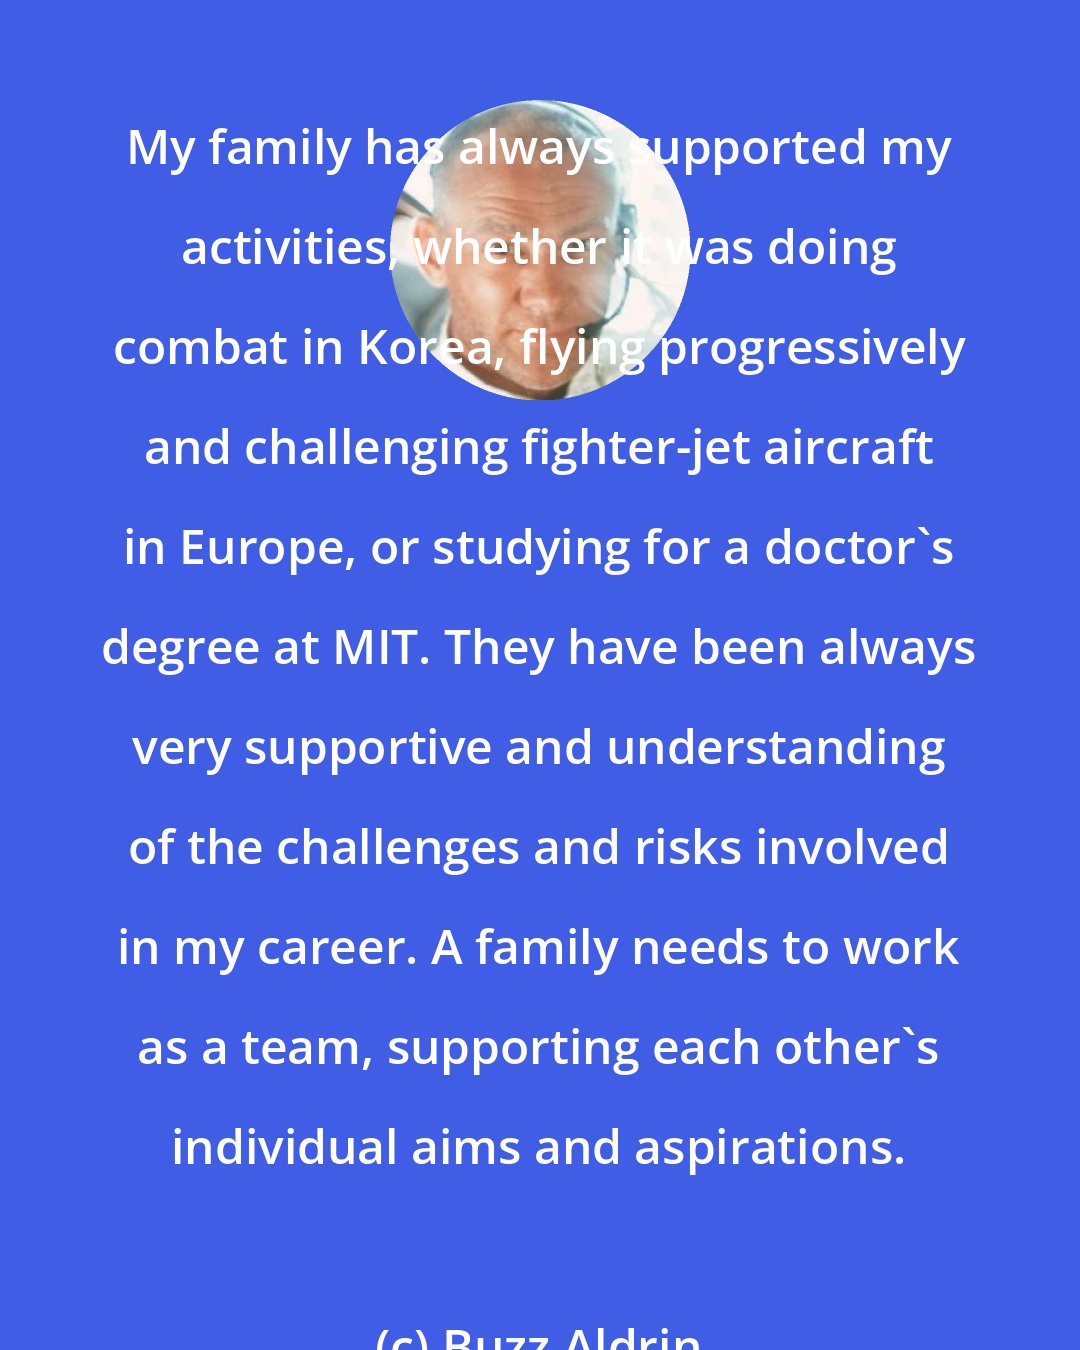 Buzz Aldrin: My family has always supported my activities, whether it was doing combat in Korea, flying progressively and challenging fighter-jet aircraft in Europe, or studying for a doctor's degree at MIT. They have been always very supportive and understanding of the challenges and risks involved in my career. A family needs to work as a team, supporting each other's individual aims and aspirations.